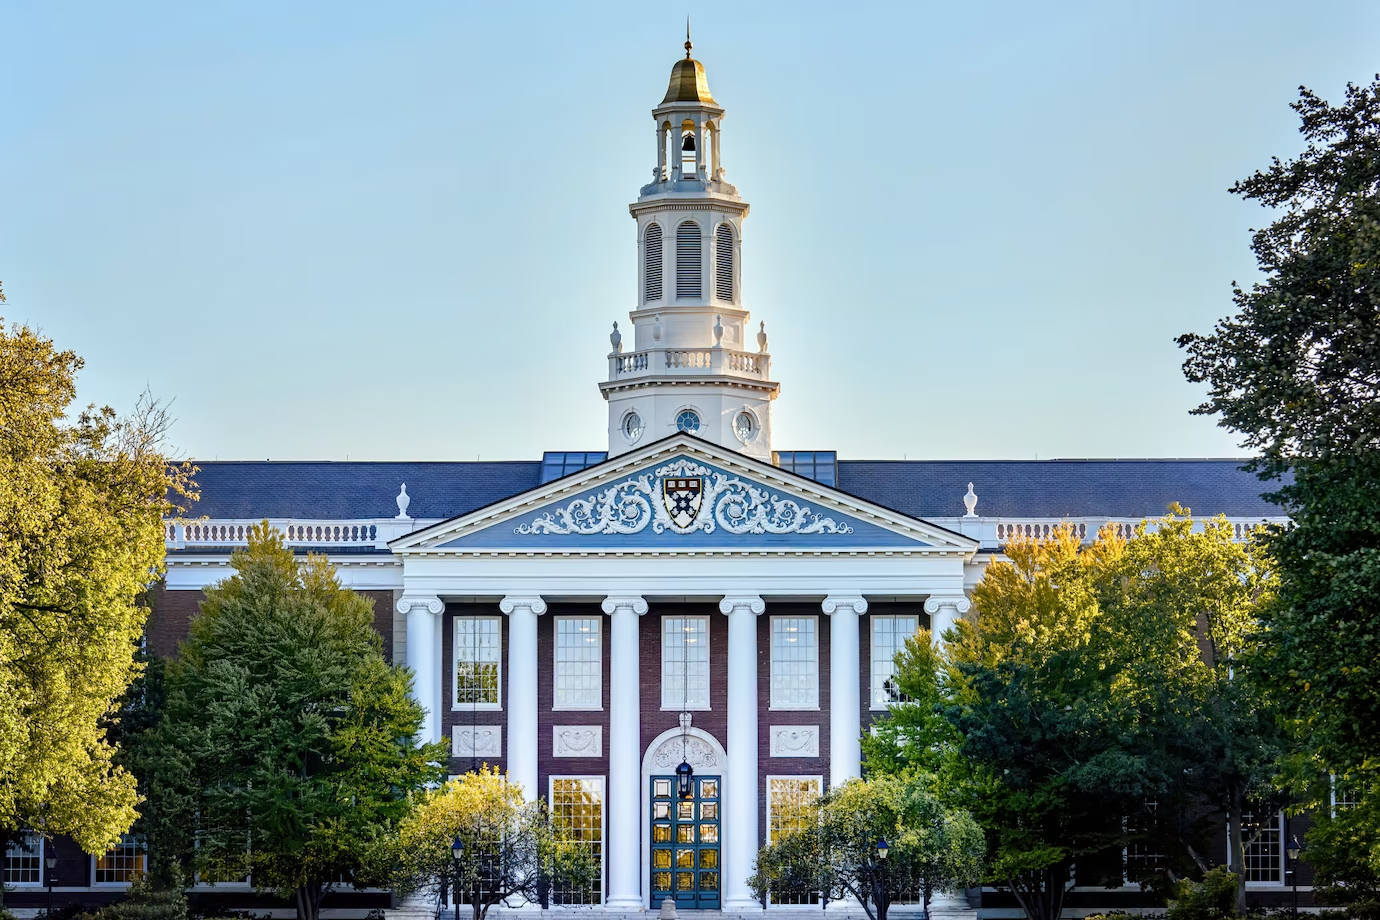 Iconic image of Harvard University, a renowned medical school.